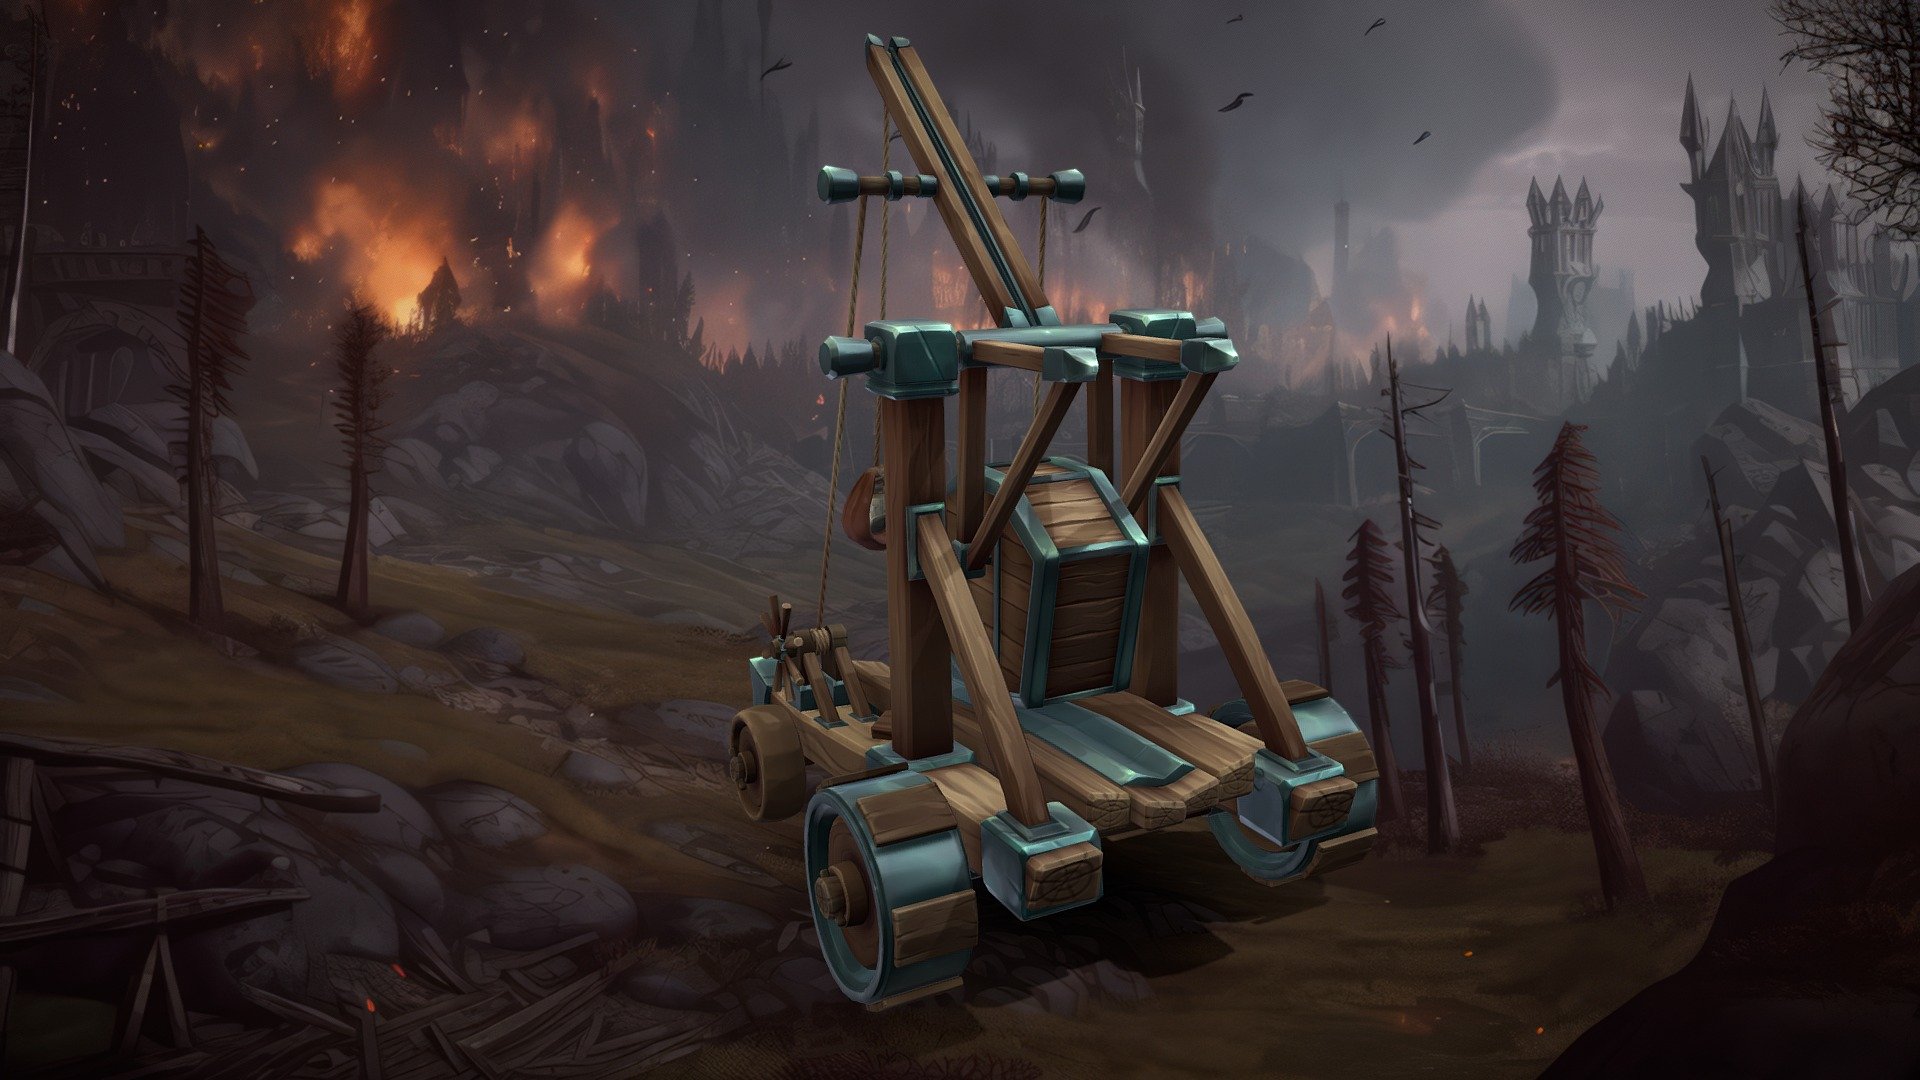 Stylized Prop for a project.

Software used: Zbrush, Autodesk Maya, Autodesk 3ds Max, Substance Painter - Stylized Medieval Trebuchet - 3D model by N-hance Studio (@Malice6731) 3d model